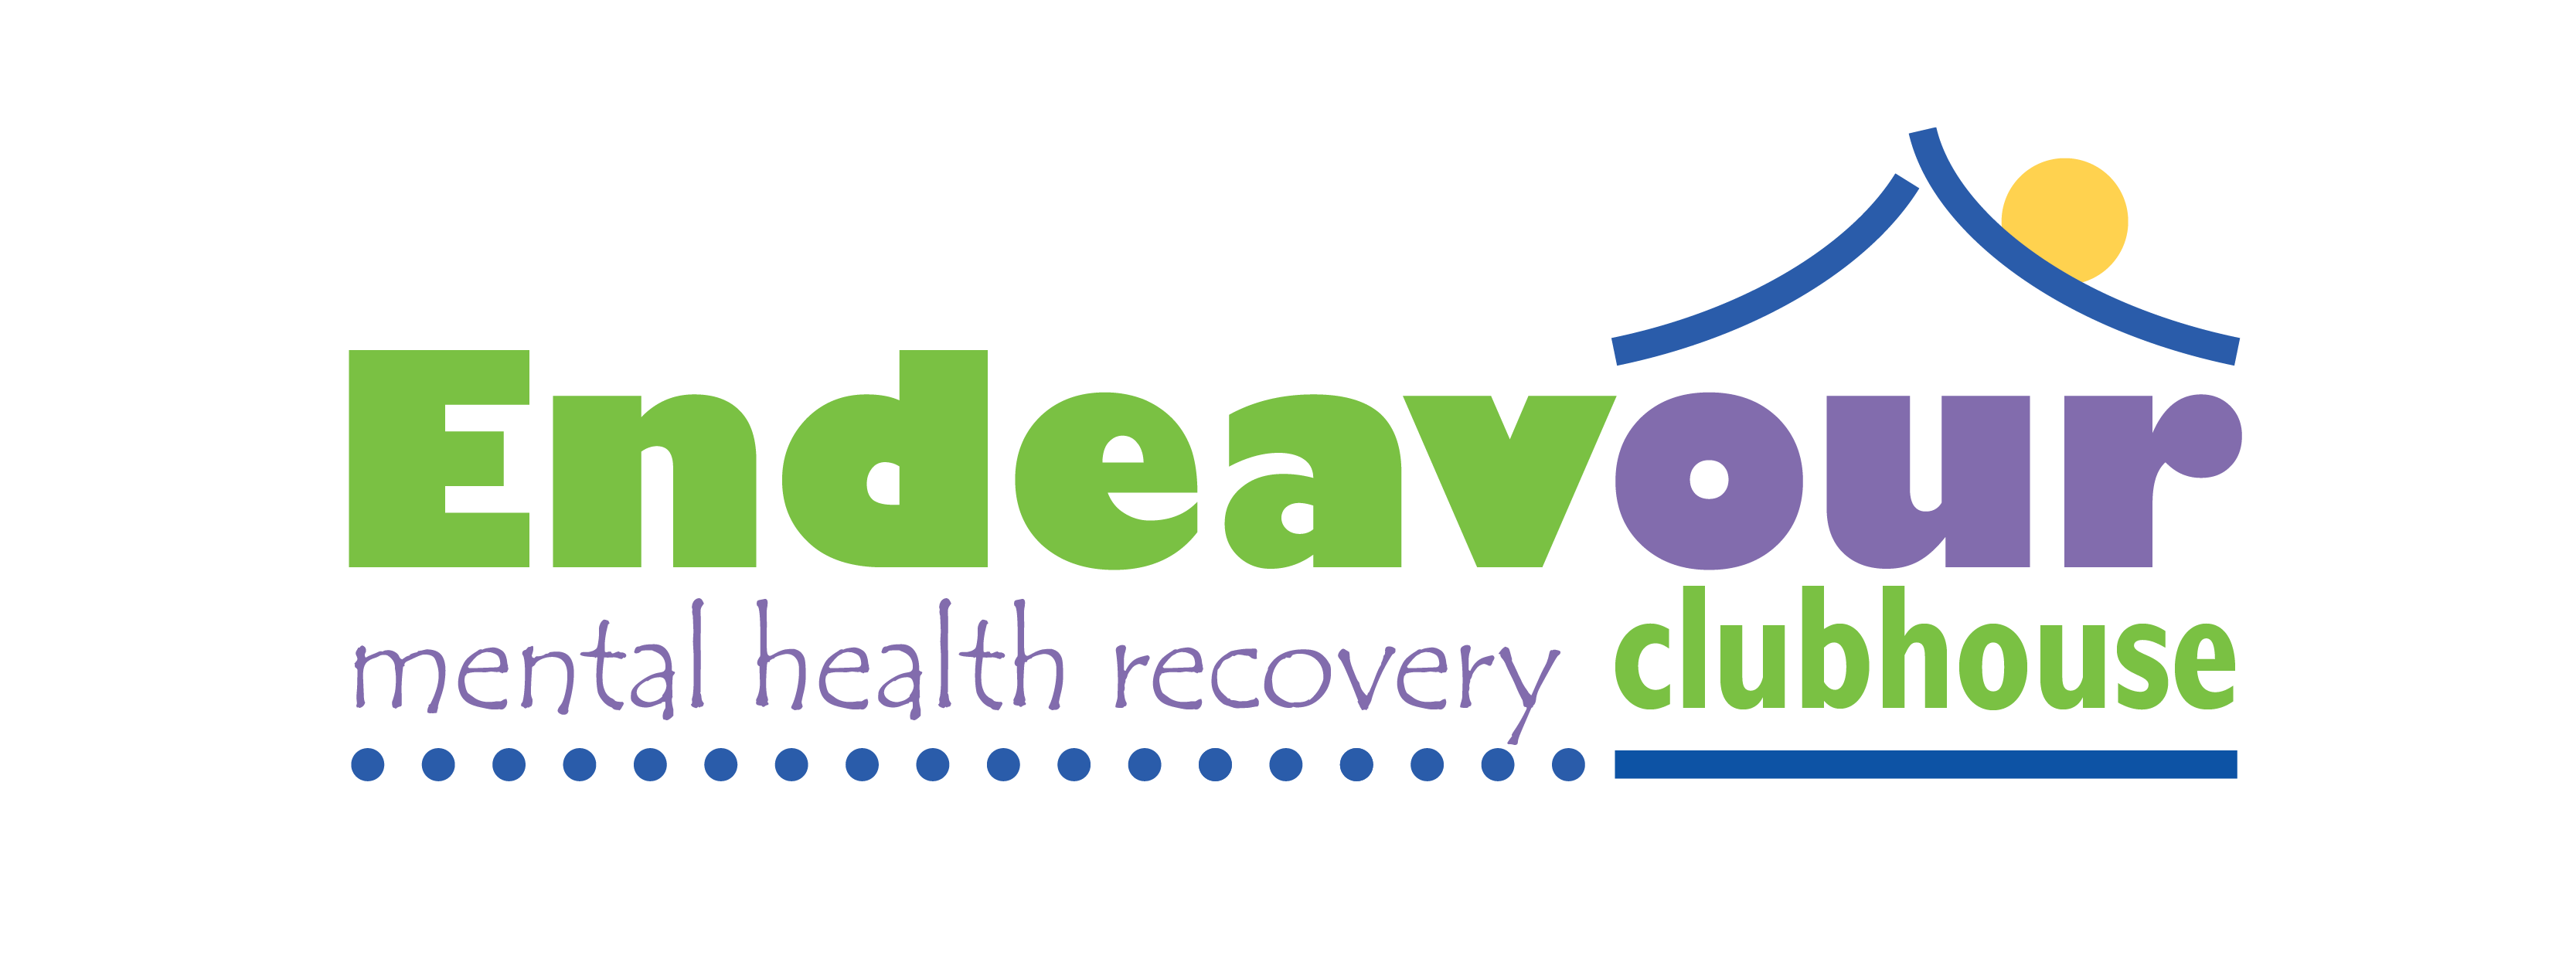 Endeavour Mental Health Recovery Clubhouse Logo